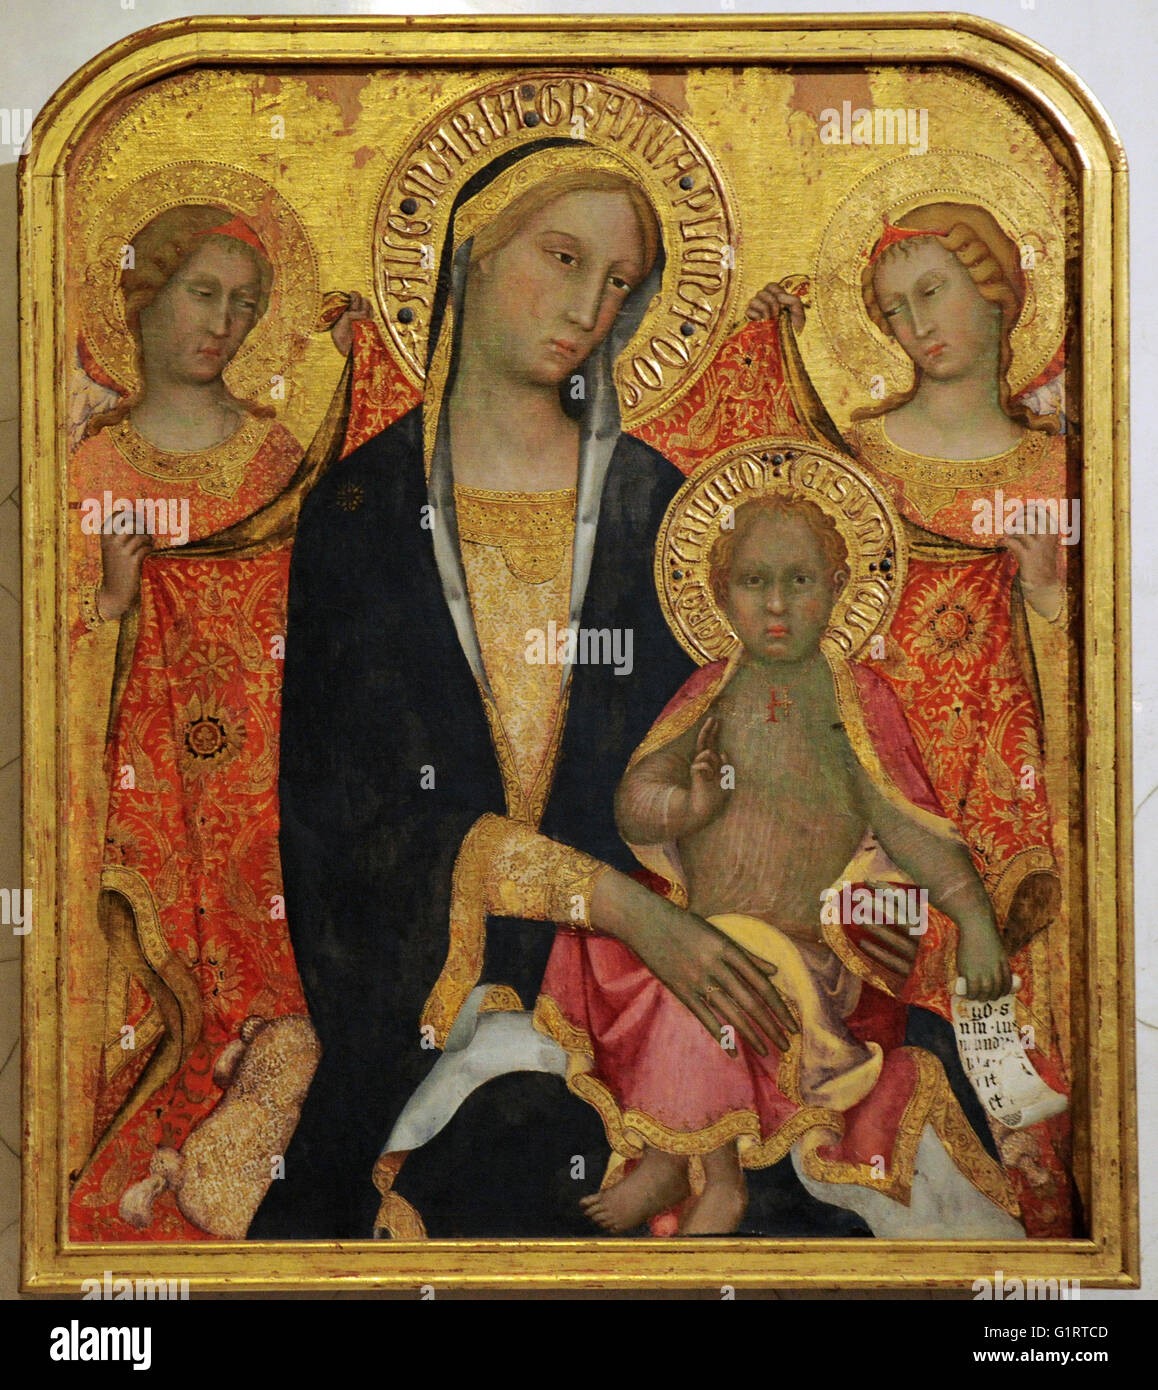 Paolo di Giovanni Fei (c. 1345- c. 1411). Italian painter. Sienese school. Madonna with Child and Two Angels, middle of the 1380s. Tempera on canvas (transferred from panel). The State Hermitage Museum. Saint Petersburg. Russia. Stock Photo